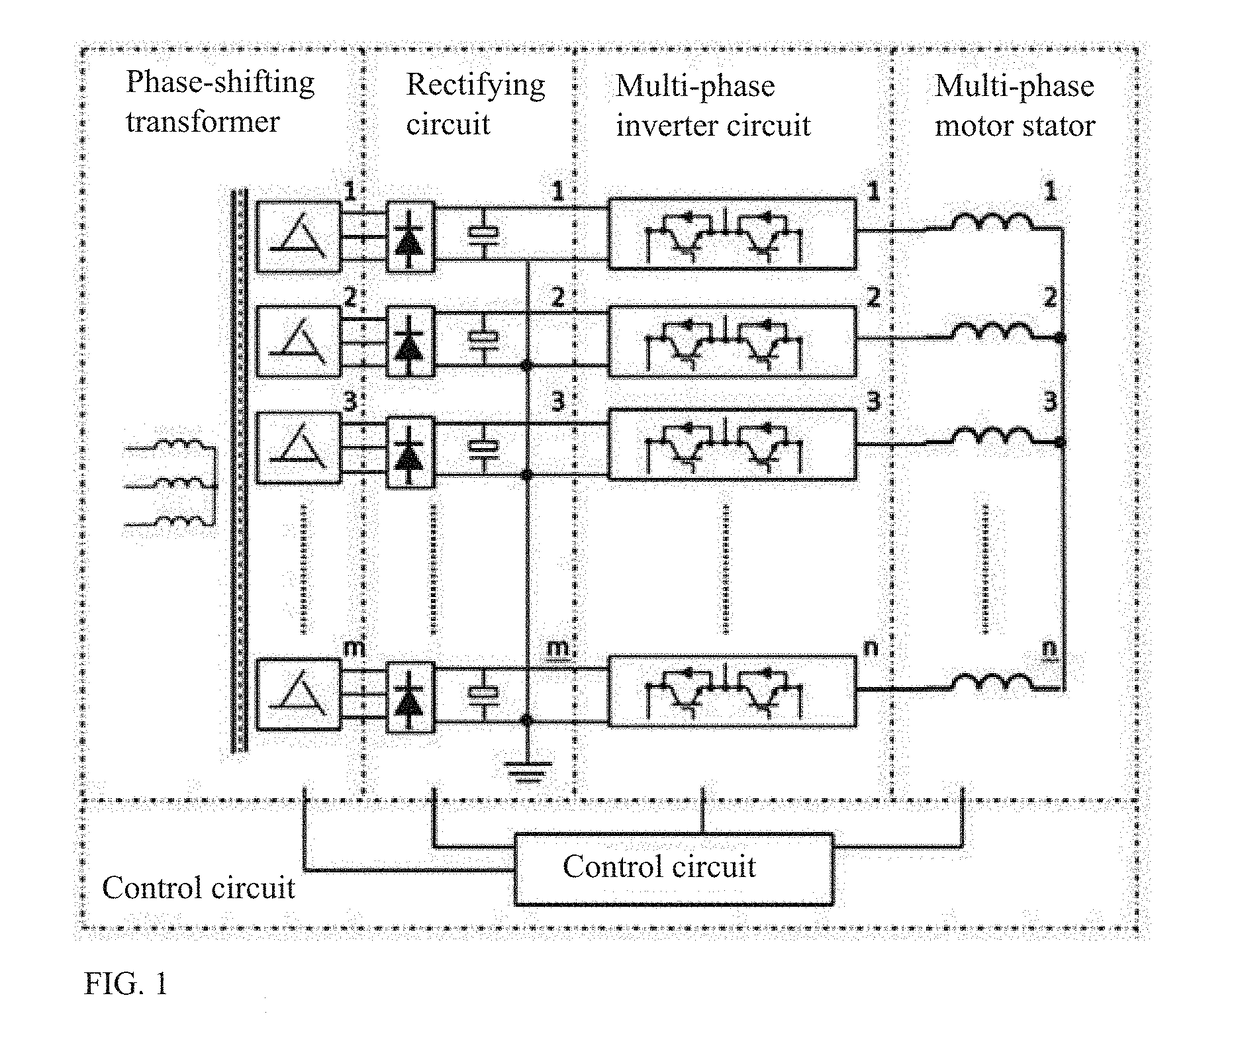 High-low-voltage conversion star multi-phase variable-frequency drive system